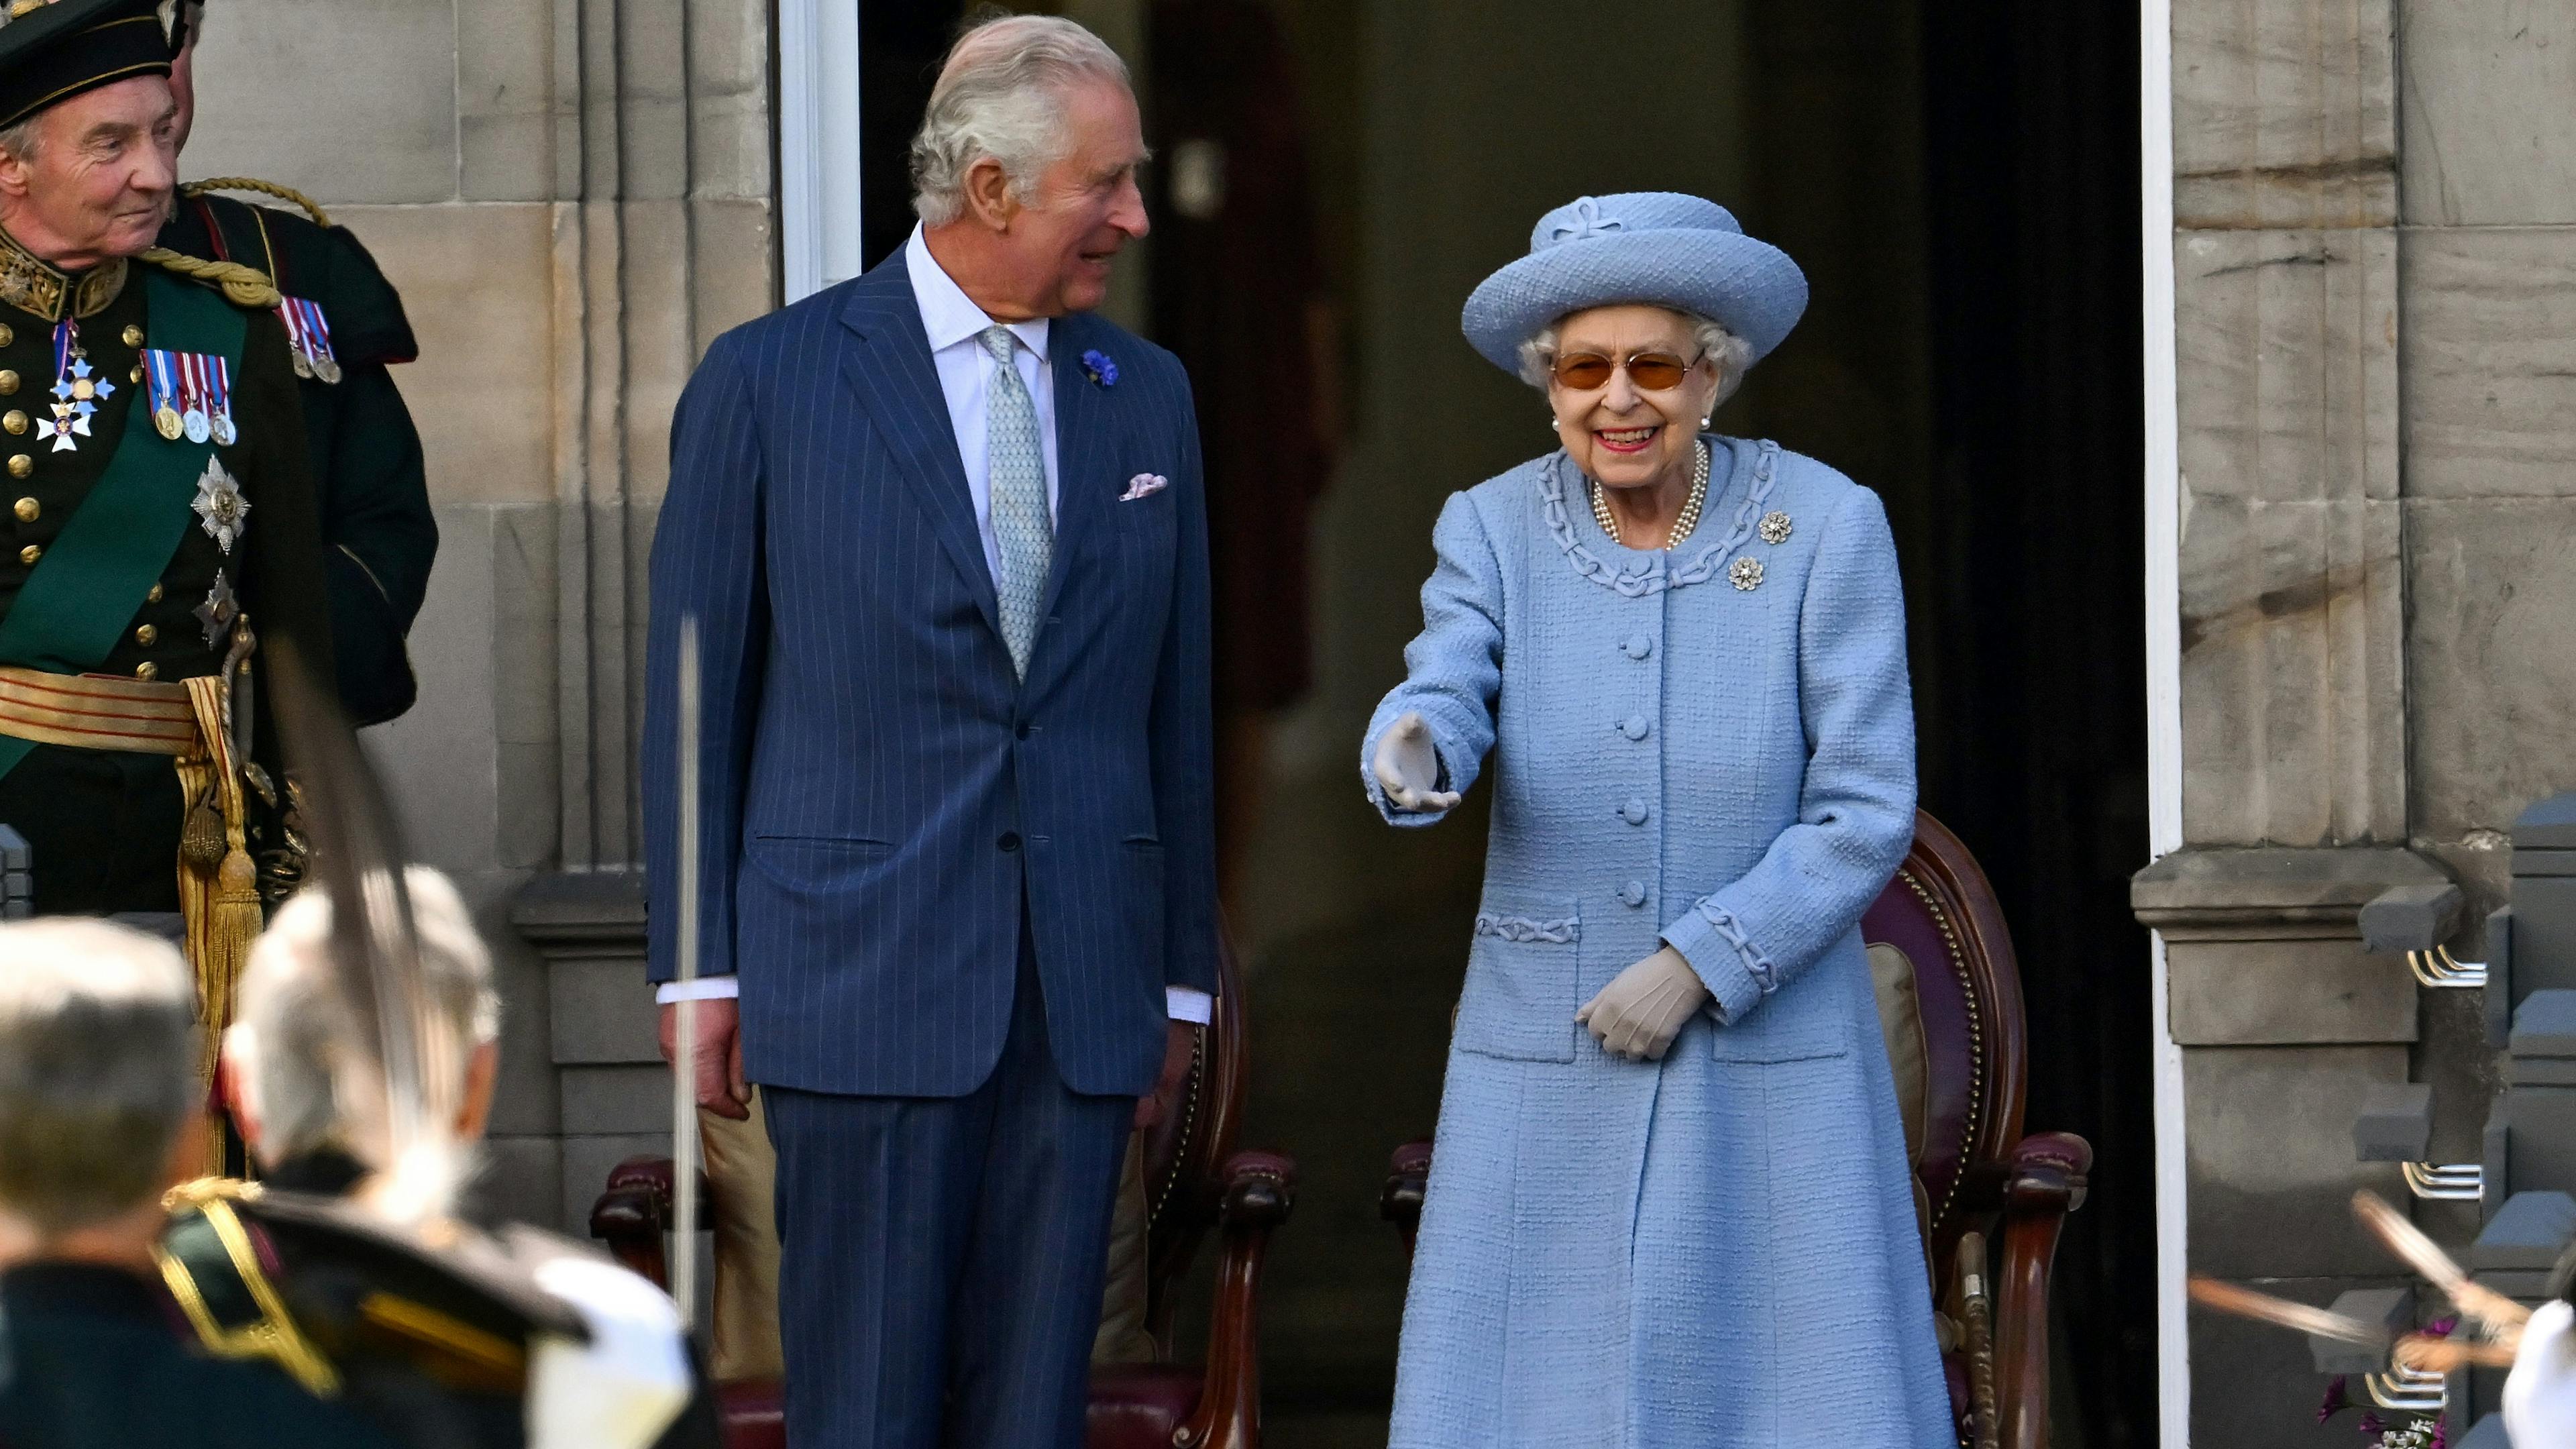 Queen Elizabeth smiling and greeting